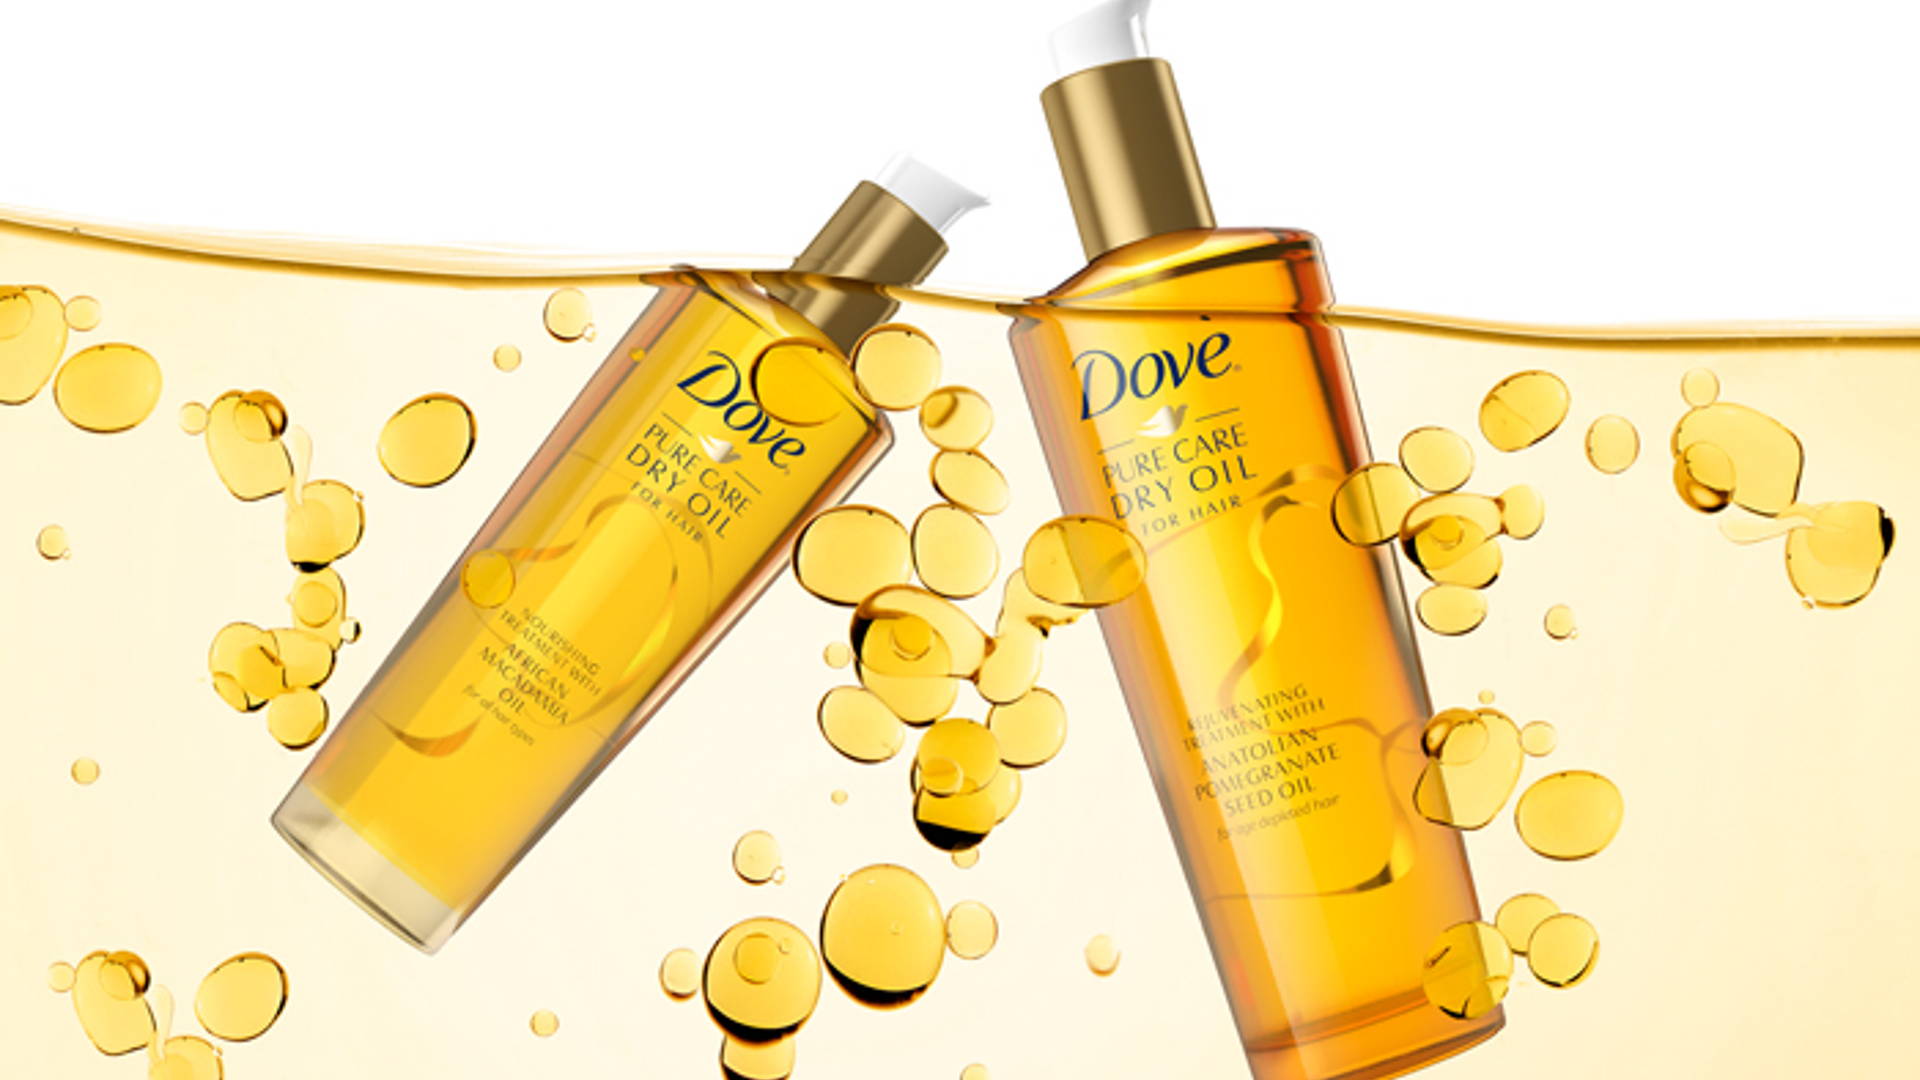 Featured image for Dove's Pure Care Dry Oil For Hair